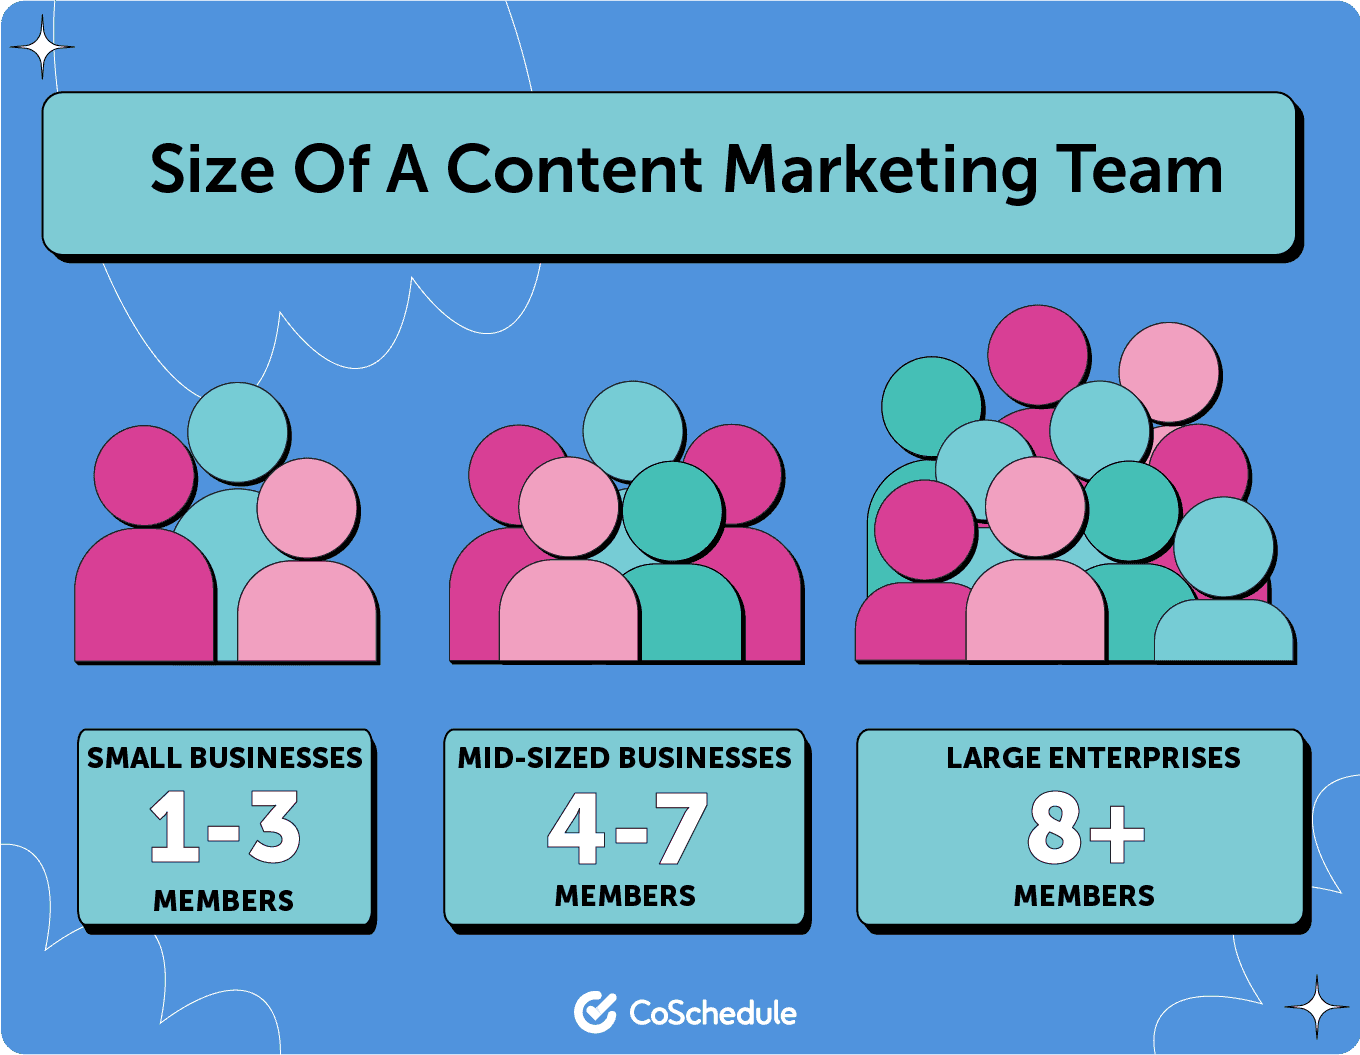 Sizes of a content marketing team ranging from small businesses at 1 to 3 members, mid-sized businesses at 4 to 7 members, and large enterprises at 8+ members